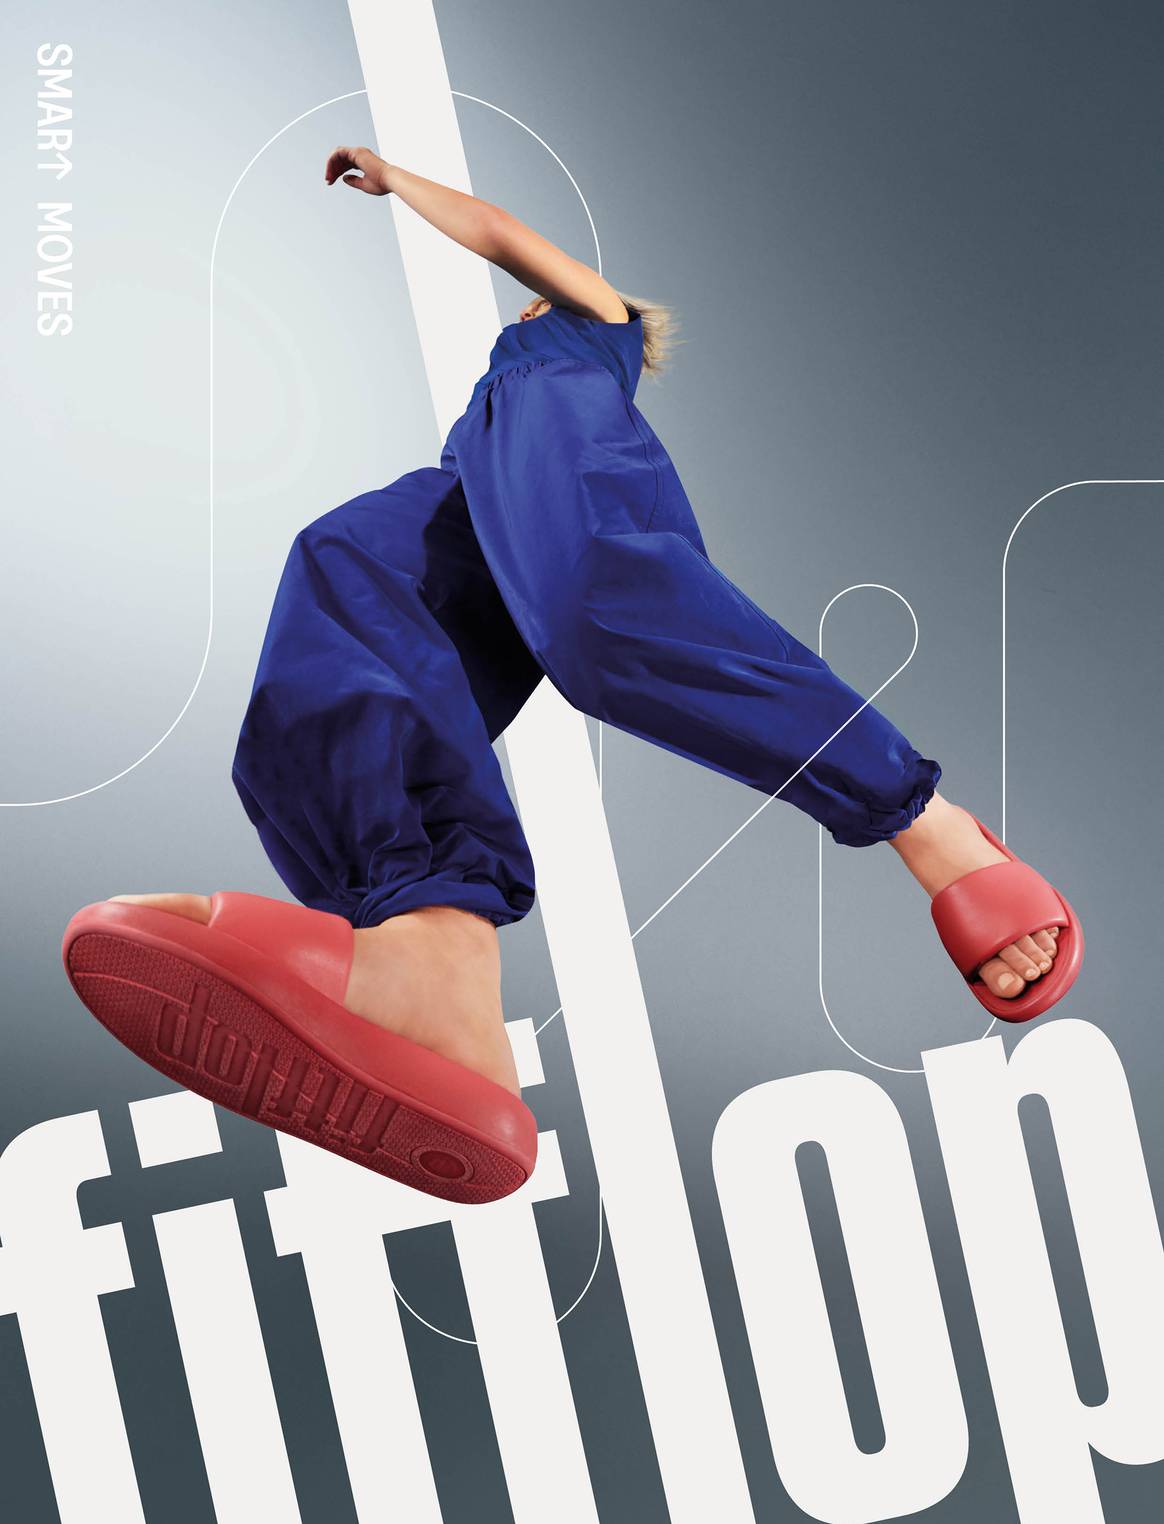 FitFlop spring 2024 ‘Smart Moves’ campaign